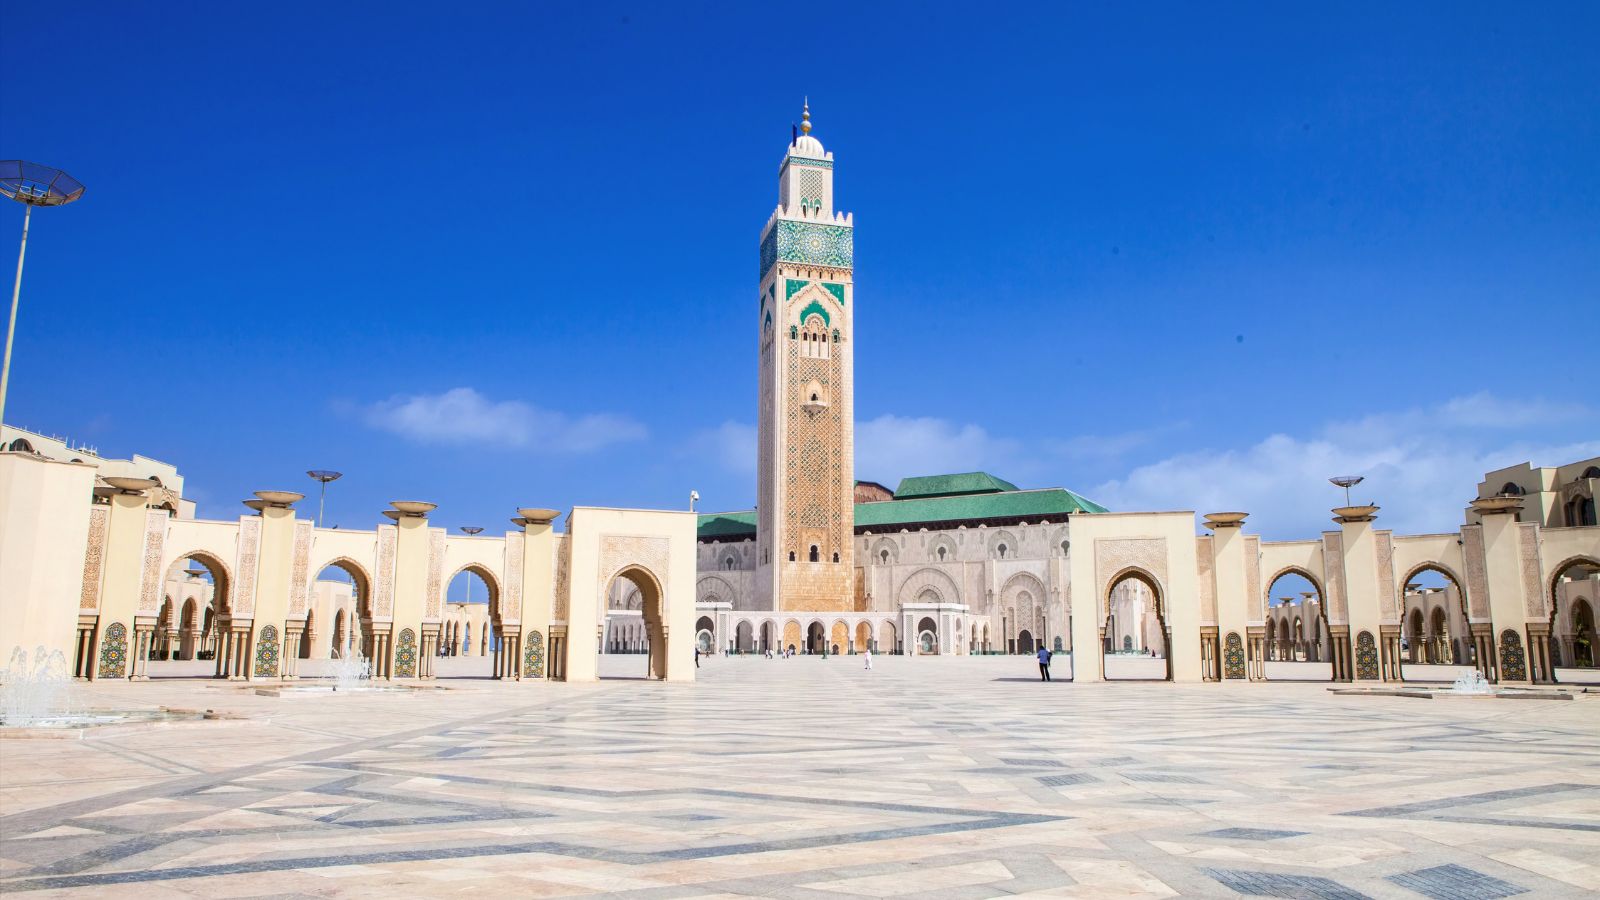 <p>Morocco is famous for its incredible palaces, mosques, and iconic architectural landmarks. However, the country records the highest percentage, with <a href="https://www.asherfergusson.com/solo-female-travel-safety/">45% in sexual violence</a>, and ranks tenth, with a percentage of 32% in physical violence, making it an unsafe place for female travelers in the world.</p>